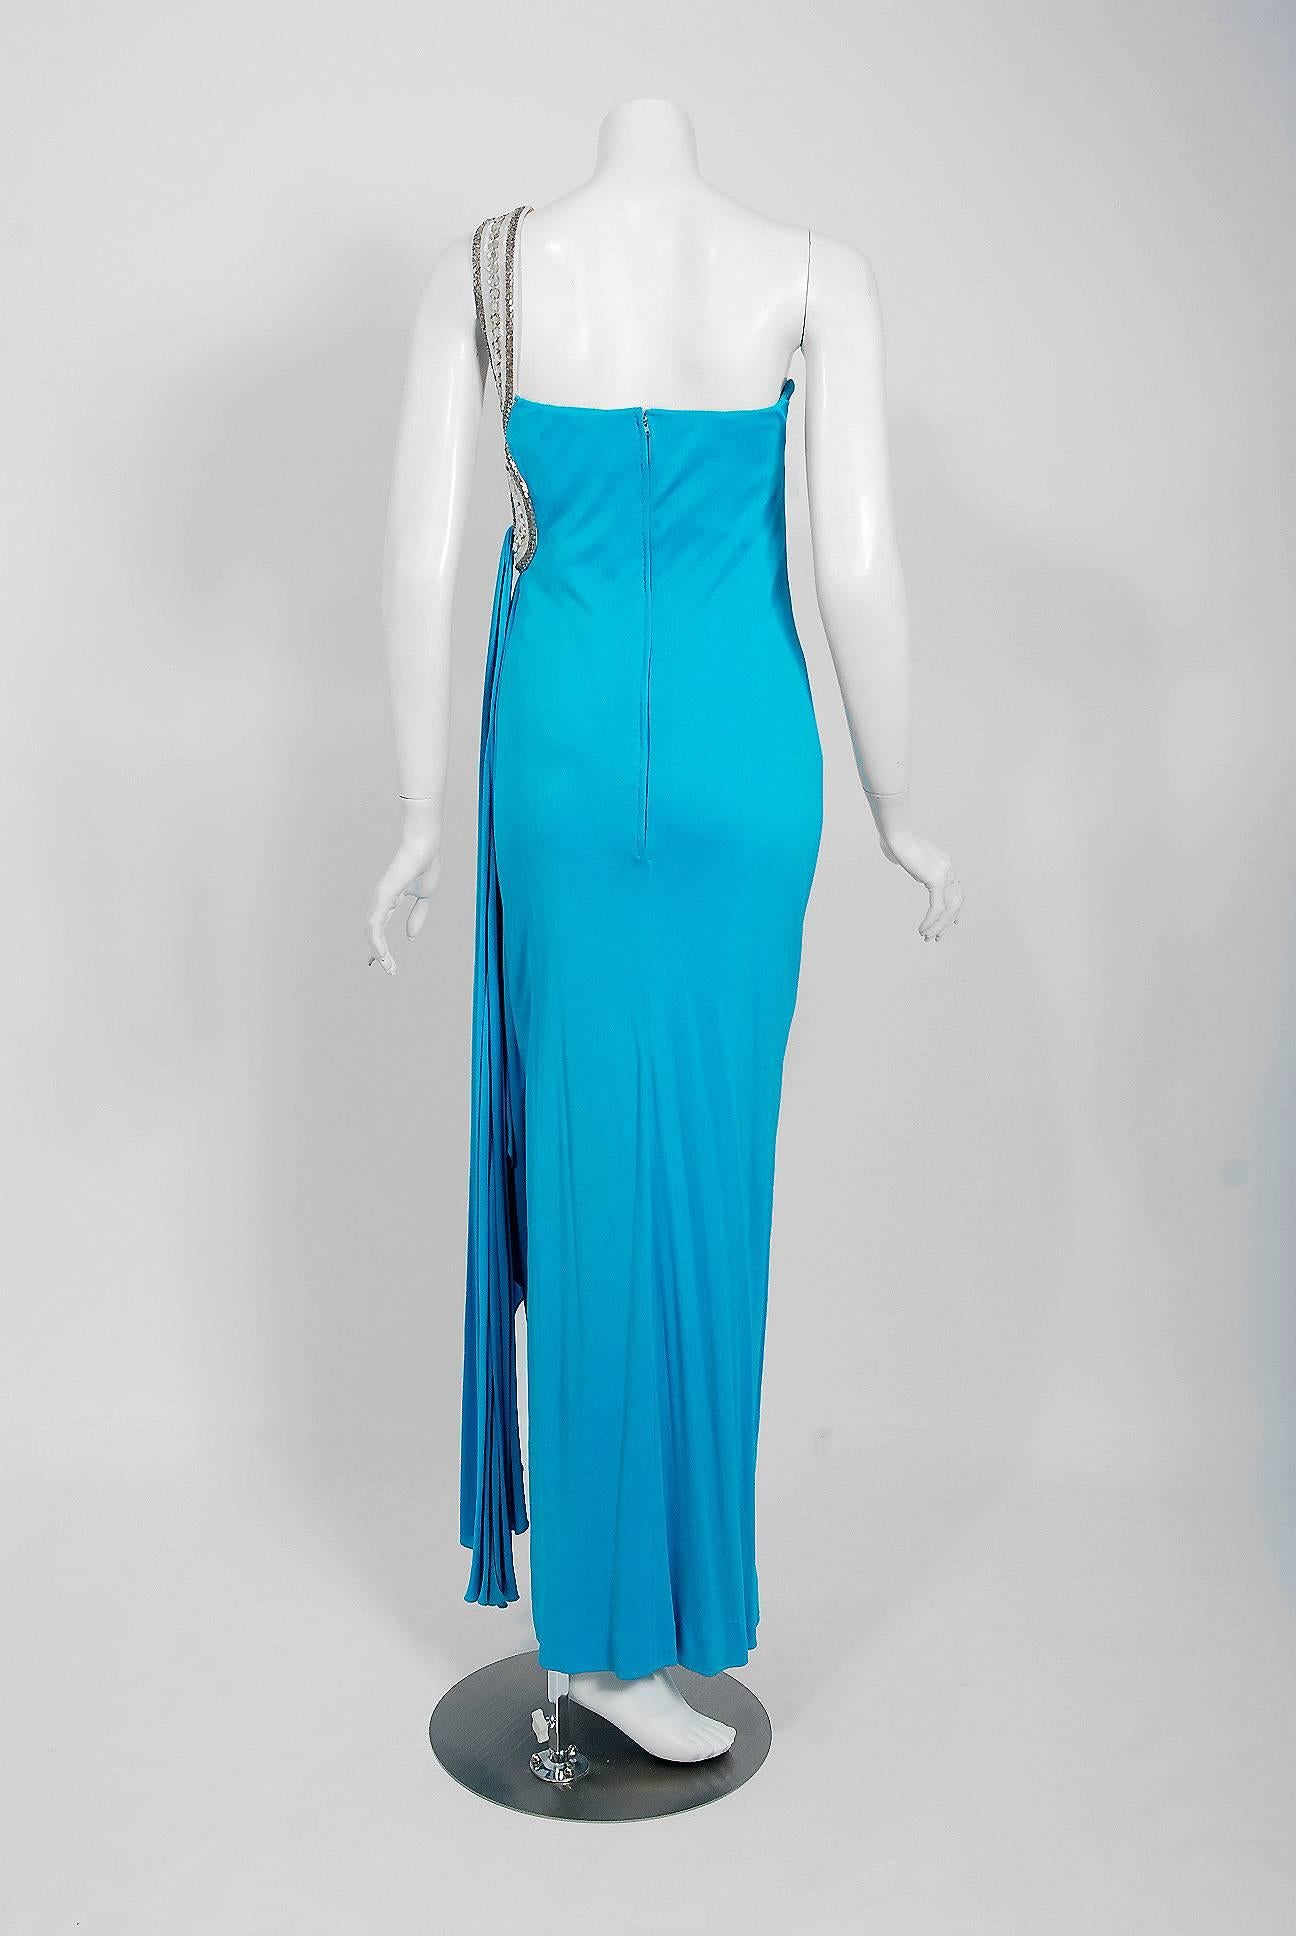 Vintage 1986 Travilla Couture Whitney Houston Design Blue One-Shoulder Silk Gown For Sale 4